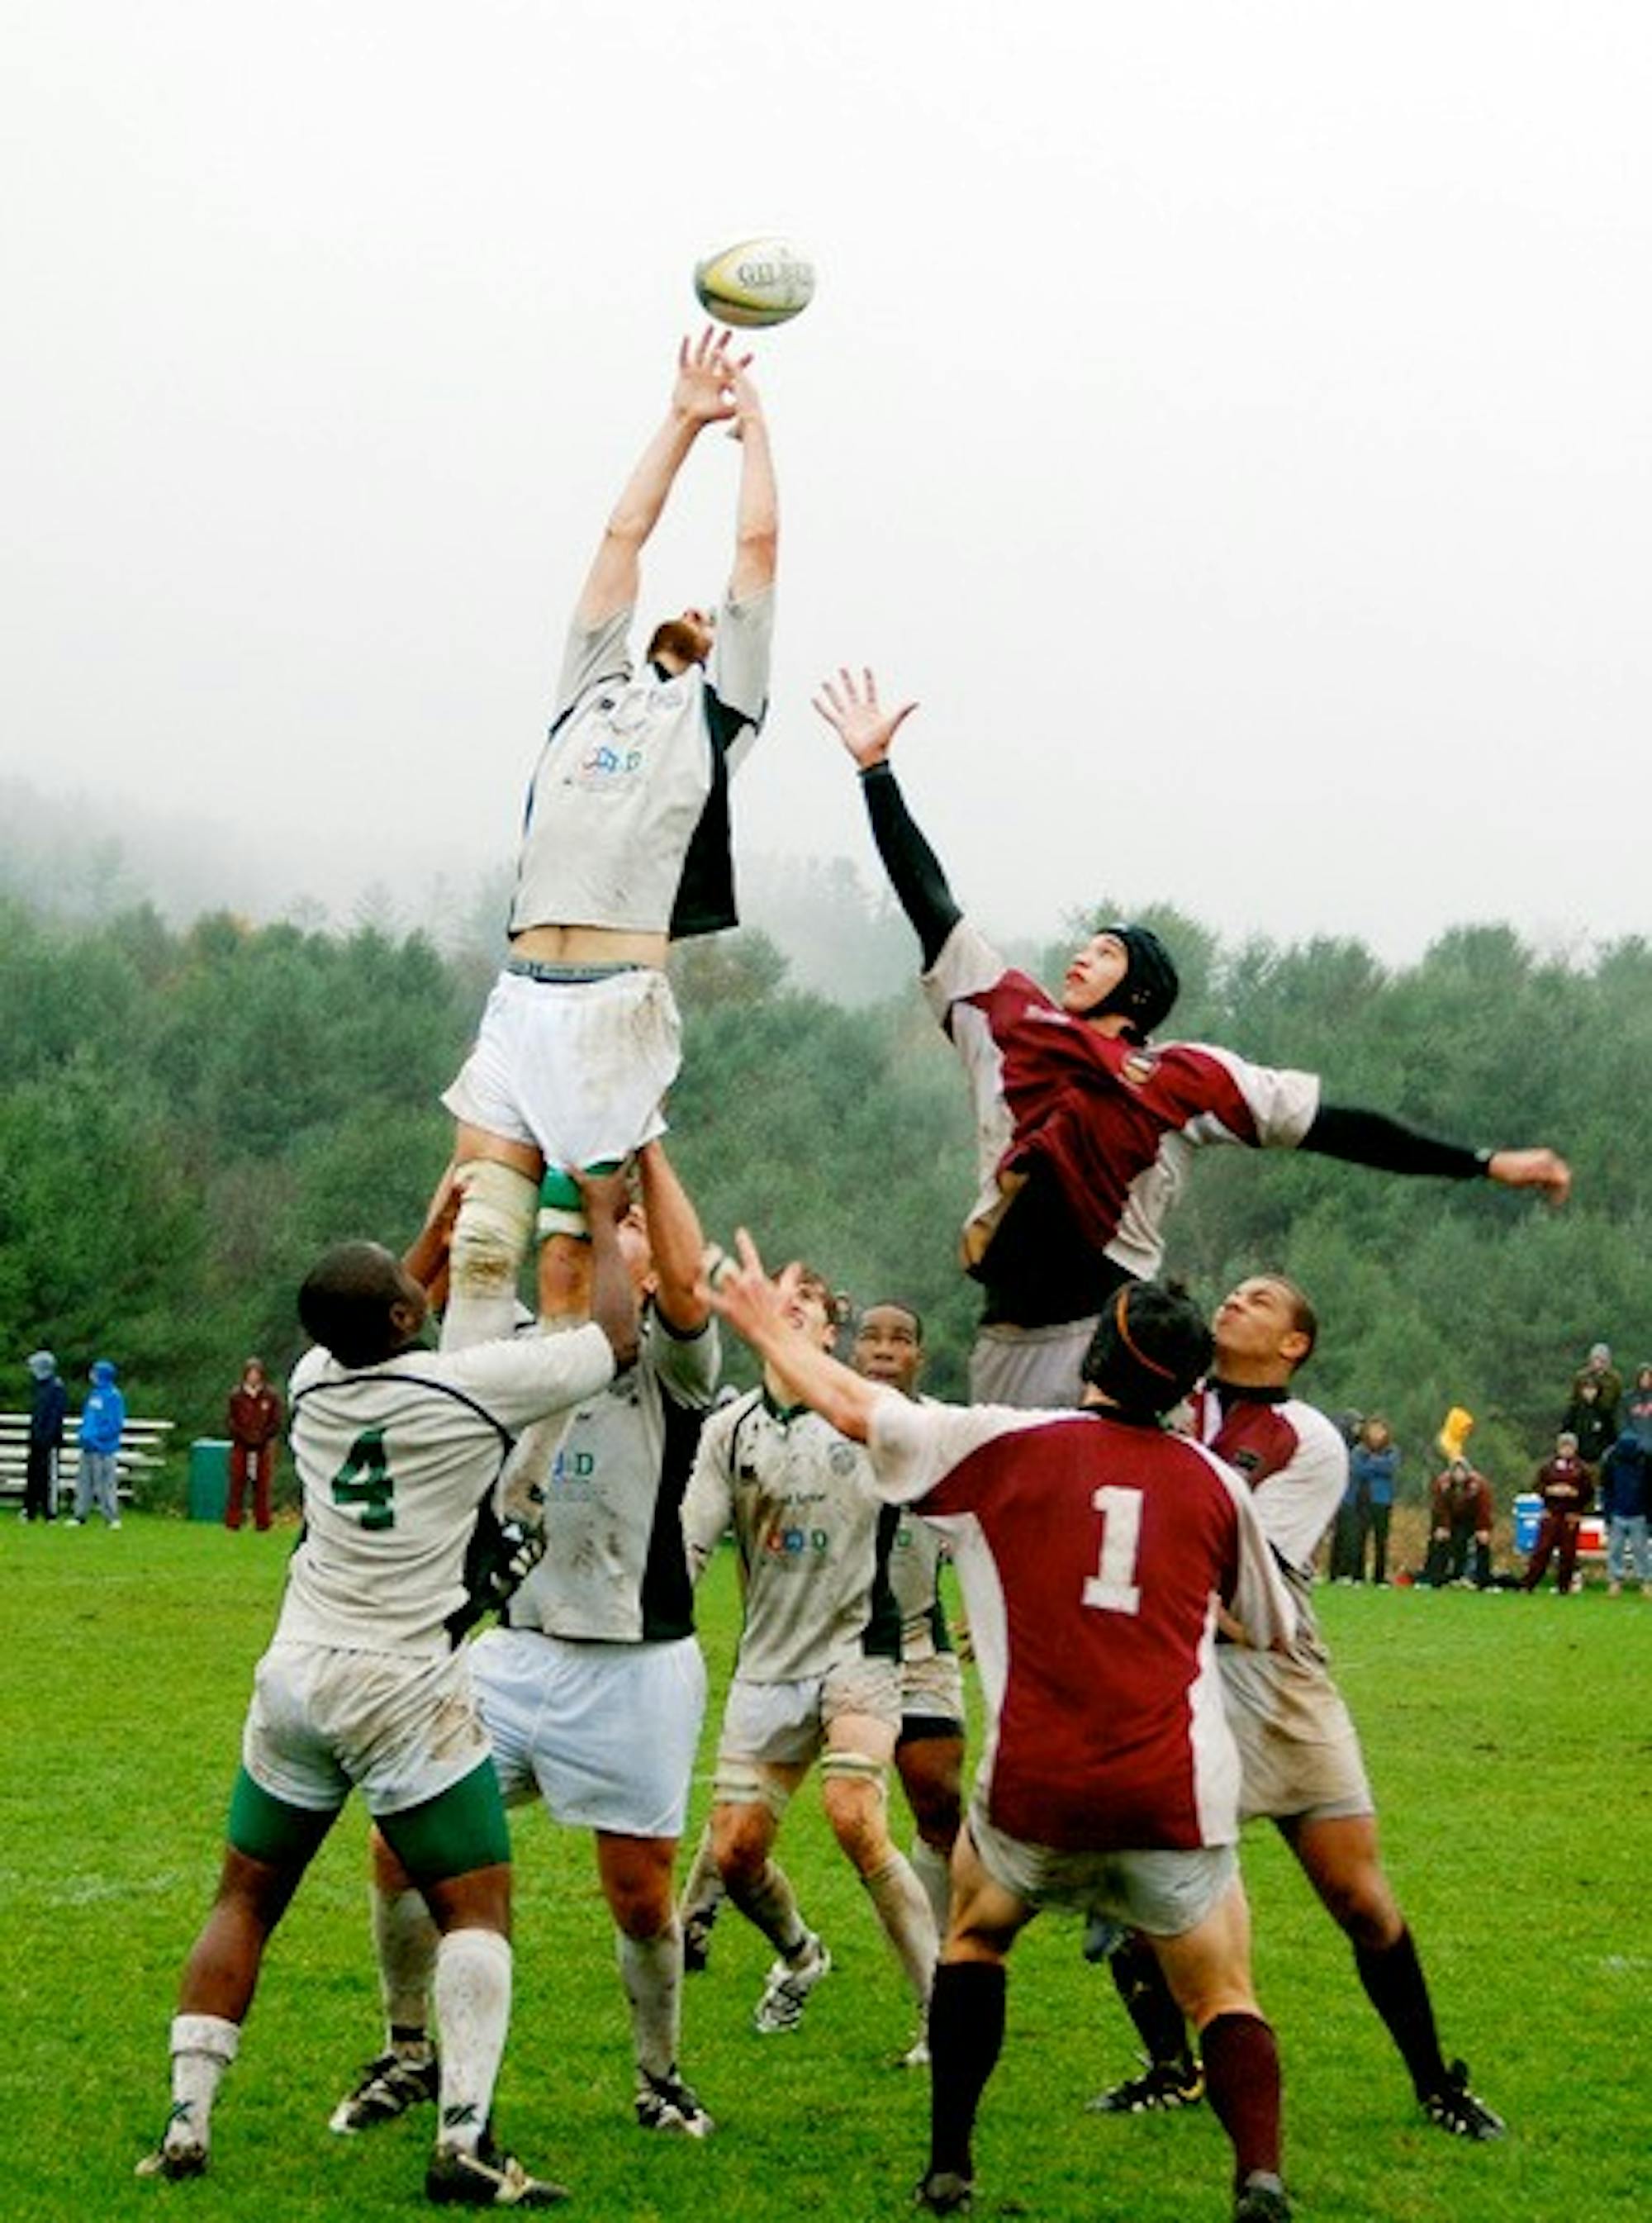 Dartmouth rugby clinched the two seed in Northeast Rugby Union playoffs.